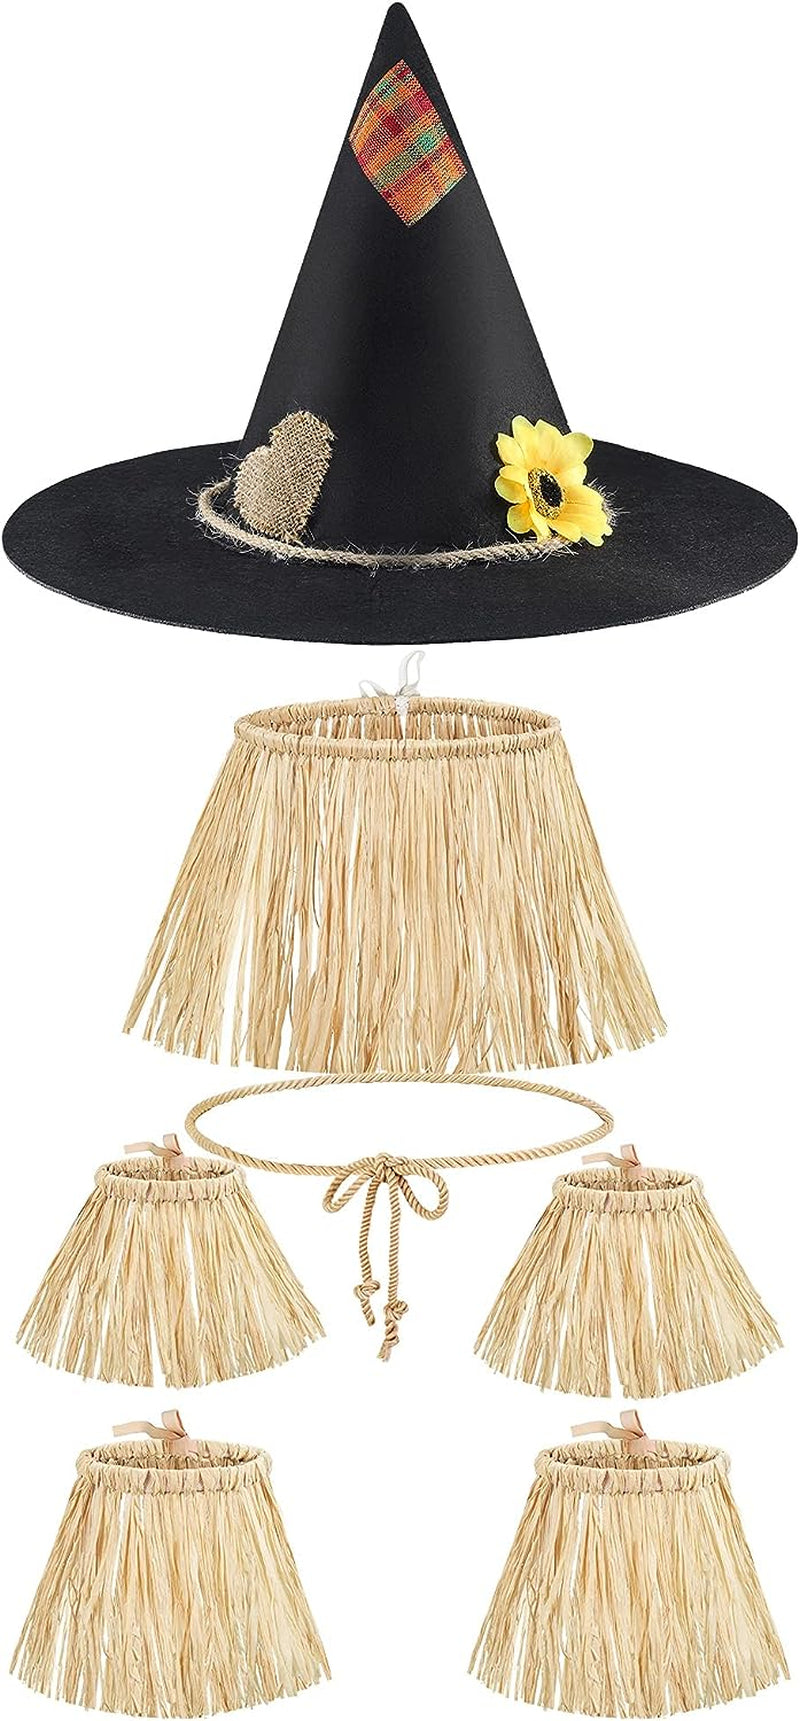 Geyoga 7 Pieces Scarecrow Costume Set Include Raffia Scarecrow Straw Kit Scarecrow Hat for Halloween Harvest Party Accessory  Geyoga Rustic Color  